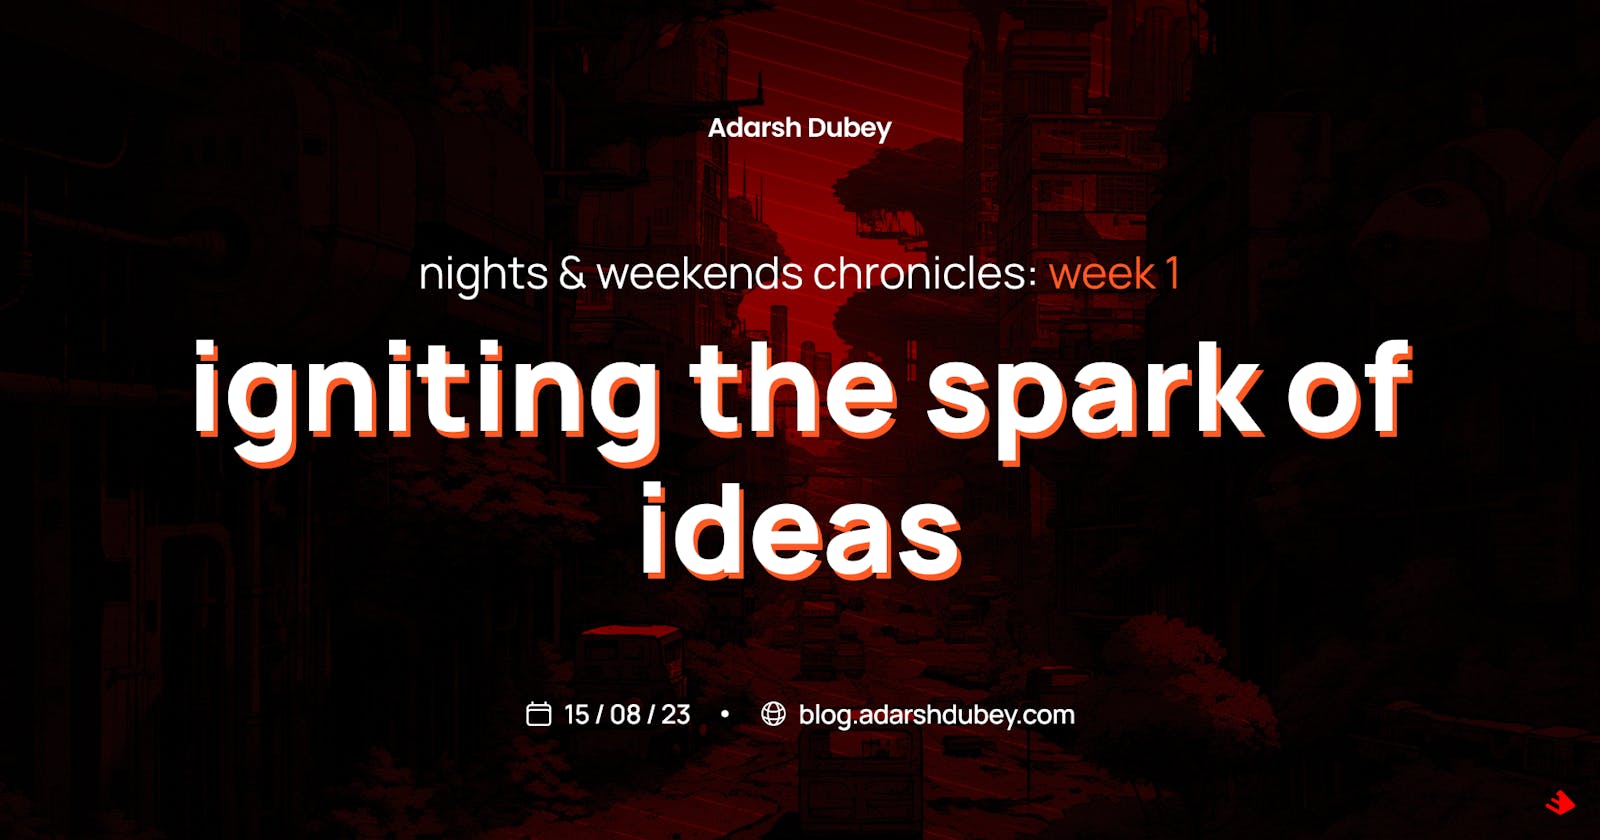 Nights & Weekends Chronicles: Week 1 - Igniting the Spark of Ideas